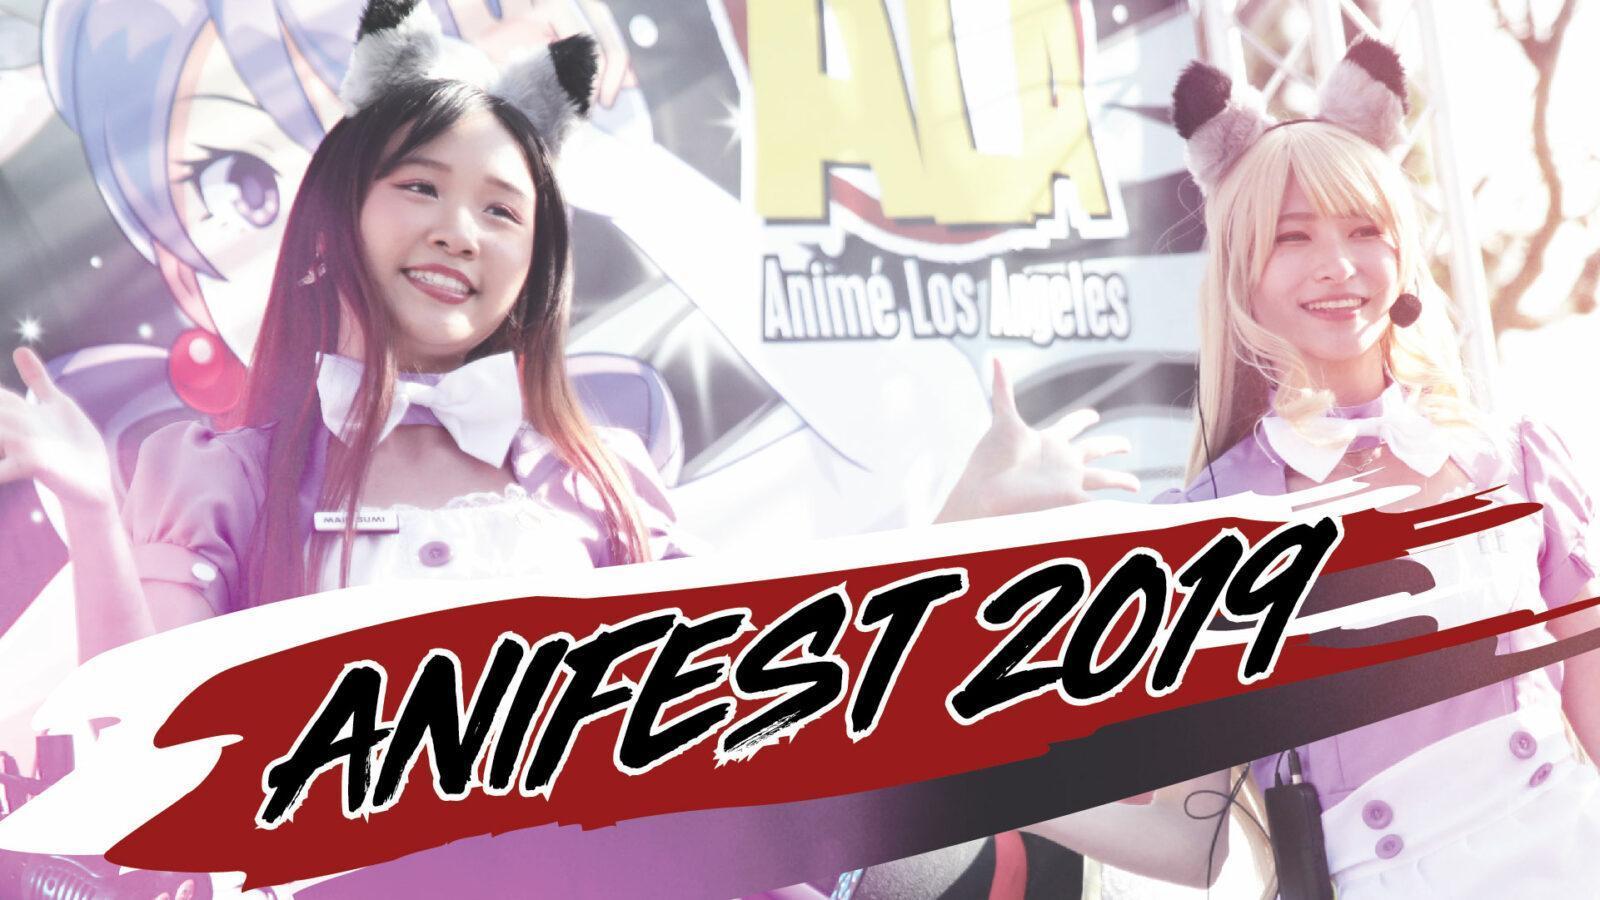 Cosplayer Ashley Chantilly will be a guest at 2016 Anime Fan Fest